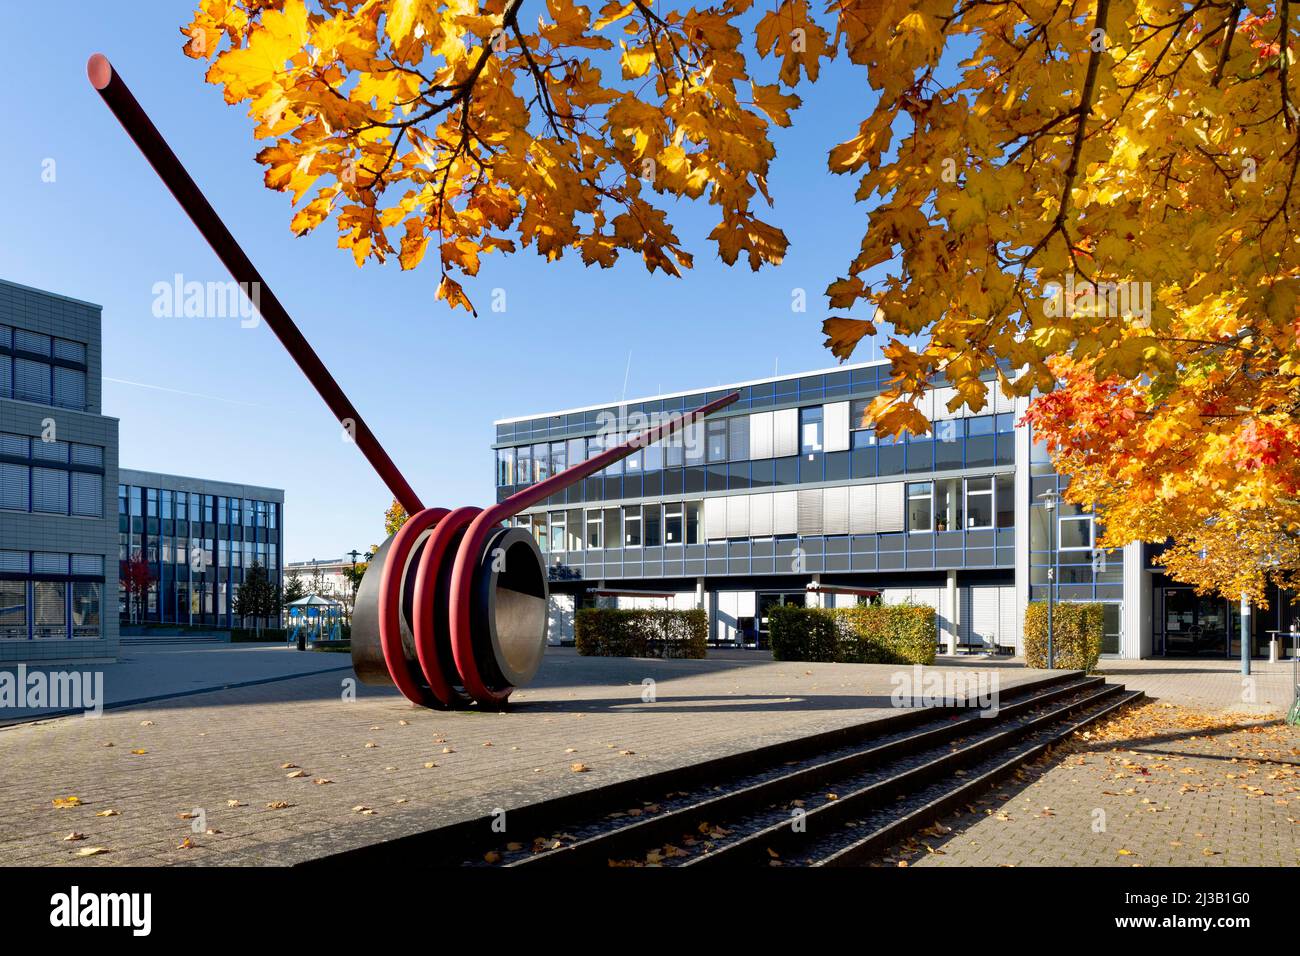 Sankt Augustin Campus of Bonn-Rhein-Sieg University of Applied Sciences, main building with library and canteen, Sankt Augustin, Rhineland, North Stock Photo